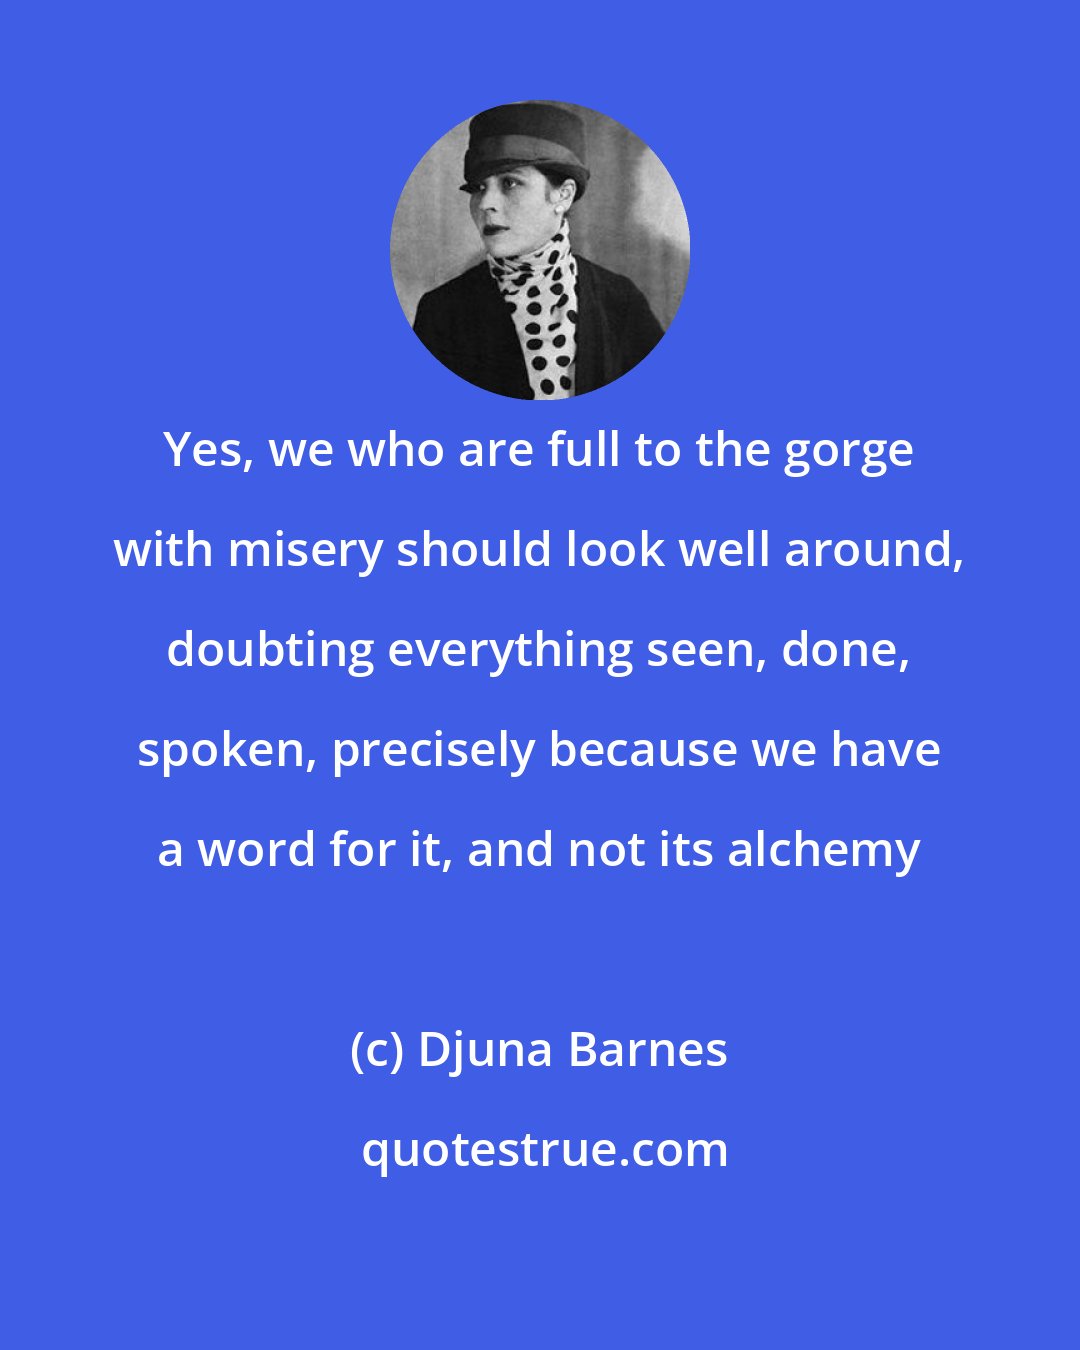 Djuna Barnes: Yes, we who are full to the gorge with misery should look well around, doubting everything seen, done, spoken, precisely because we have a word for it, and not its alchemy